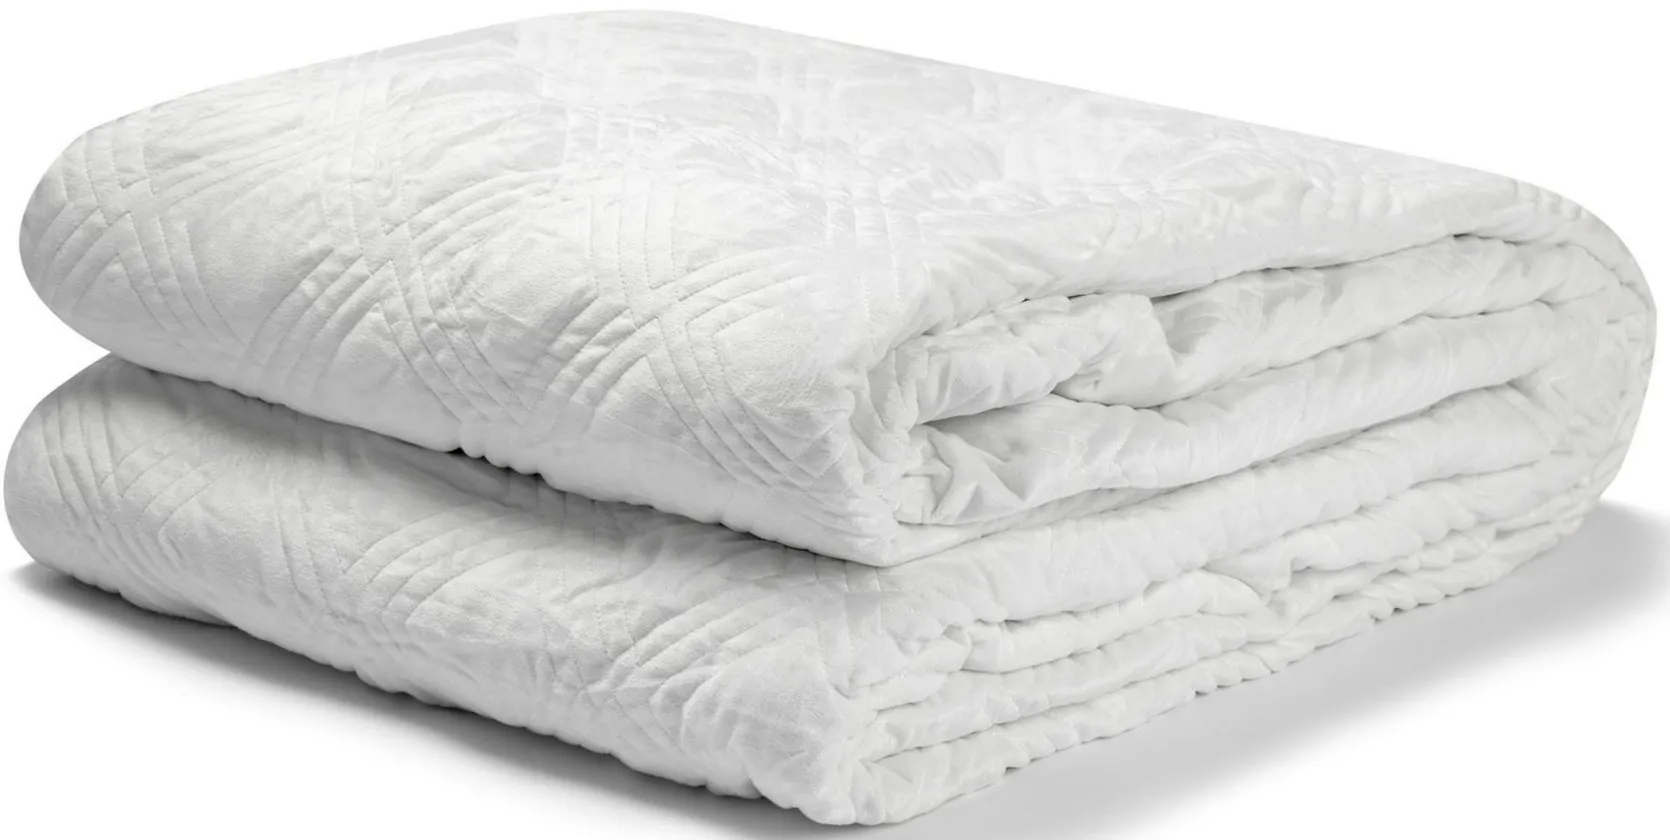 The Hush Classic 30lbs. Blanket with Duvet Cover in White by Hush Blankets